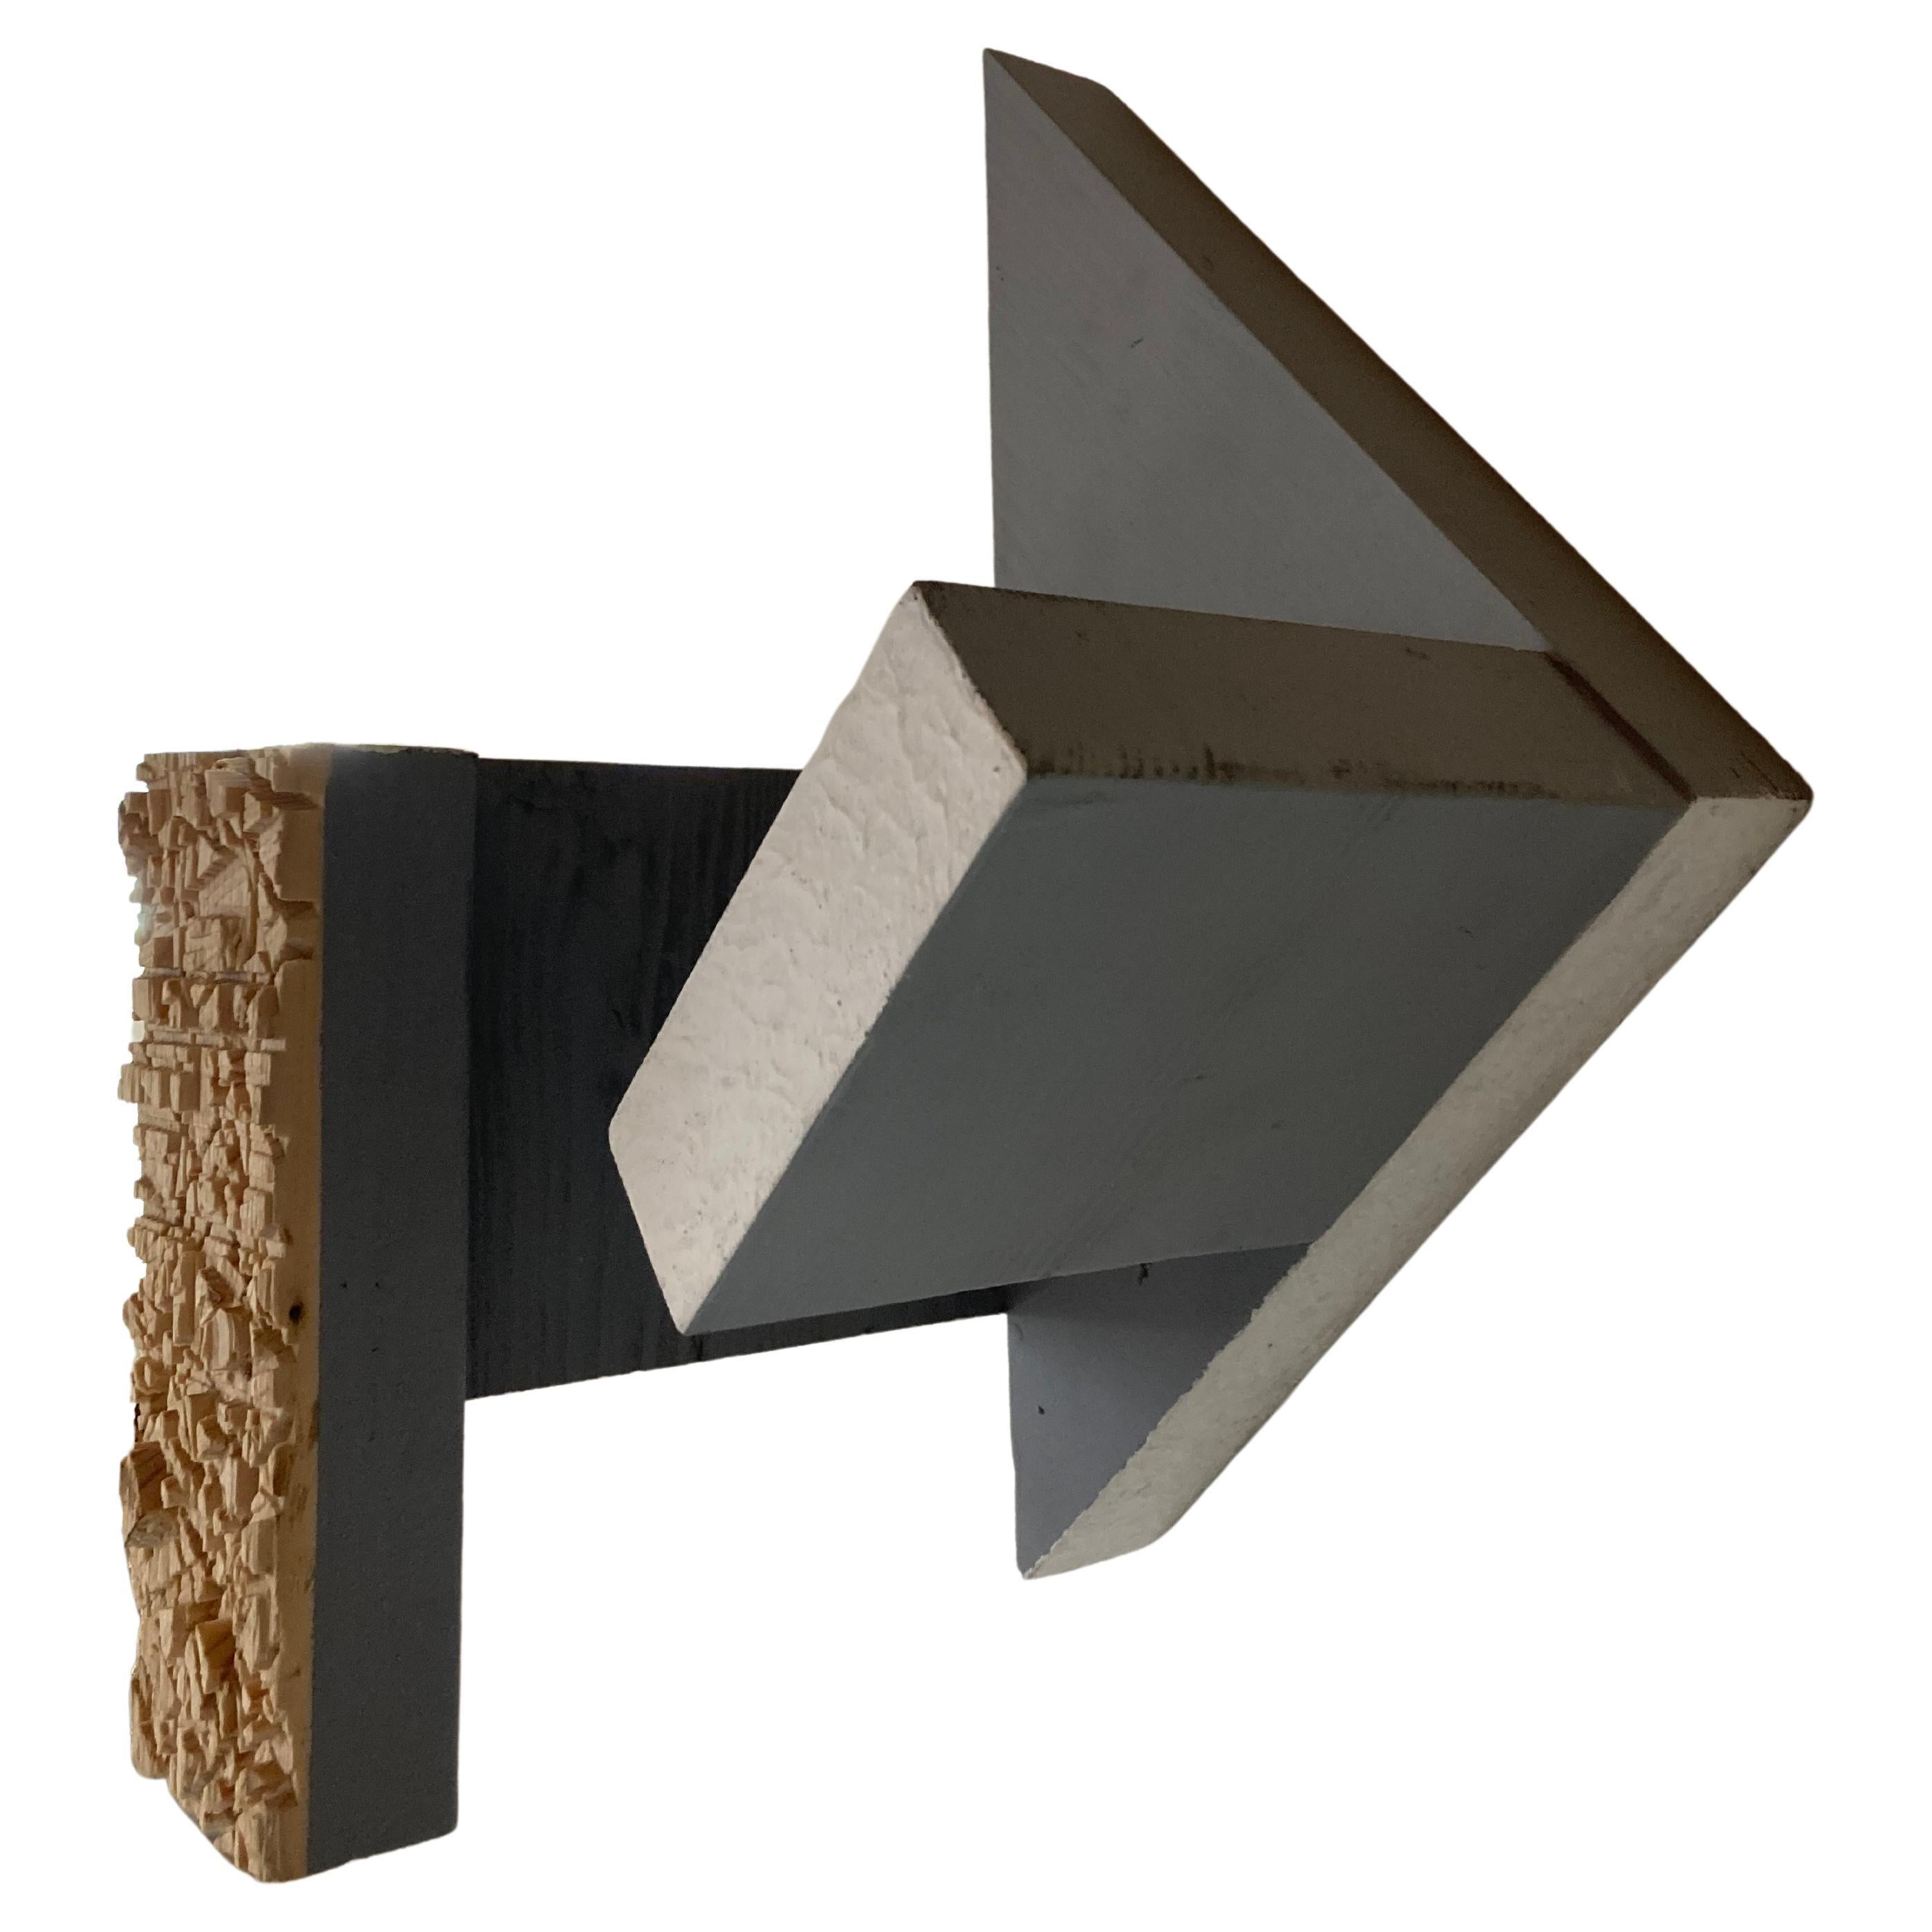 Contemporary Art Harm De Veer Abstract Wood Sculpture Just Hanging There 1 Grey  For Sale